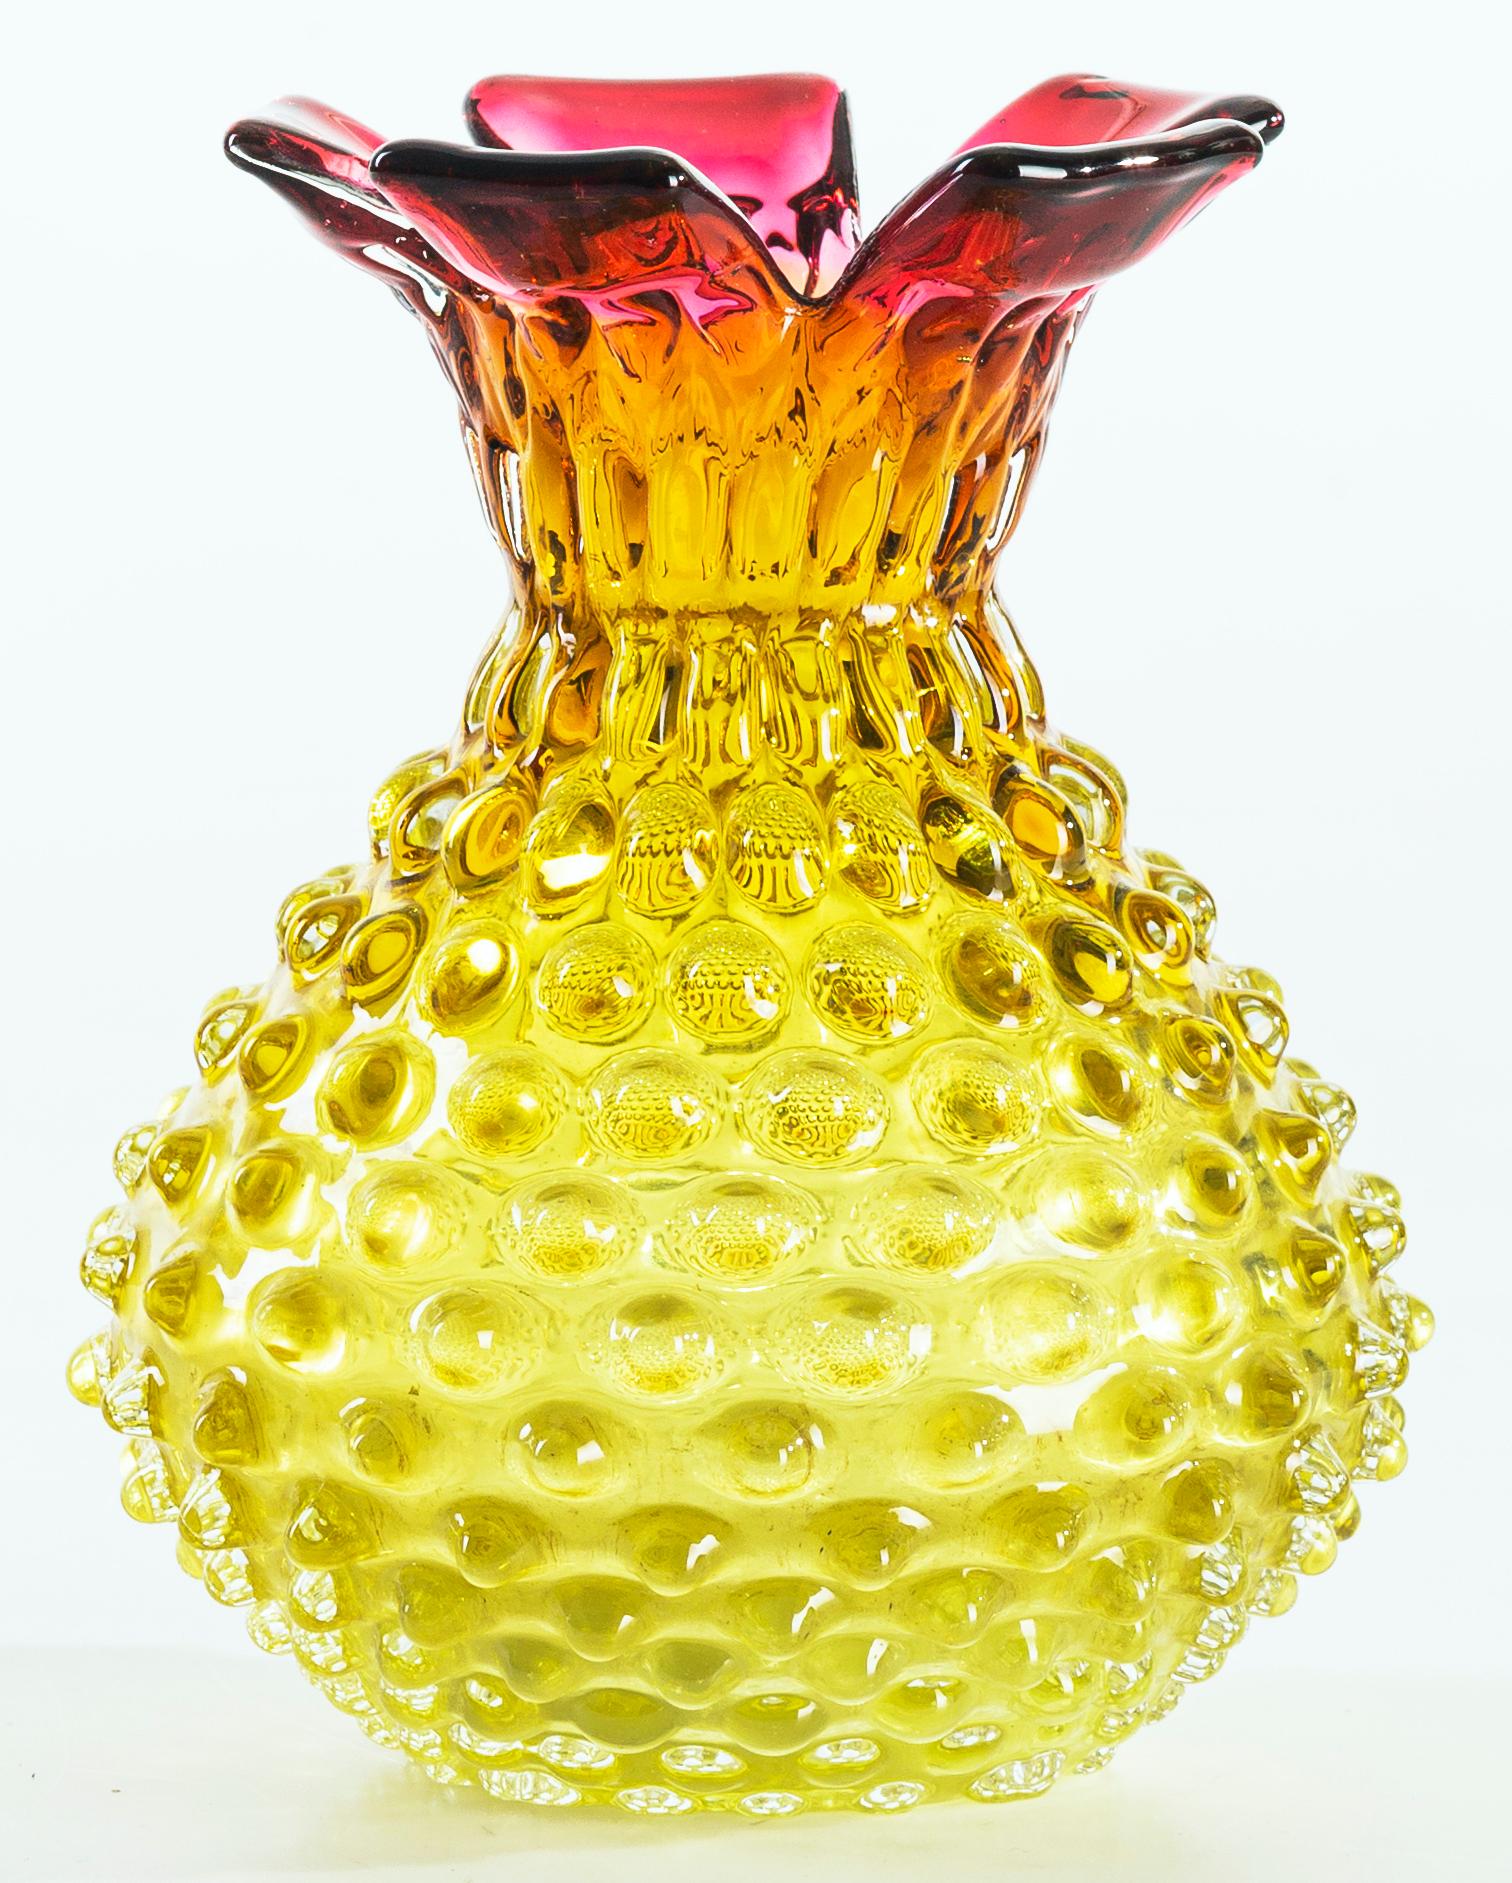 This vintage glass vase is an original glass decorative object: a superb little glass vase realized in Austria, circa 1950s of the 20th century. 

With a particularly rough surface (Mugnone's working process) and with a changing color from magenta